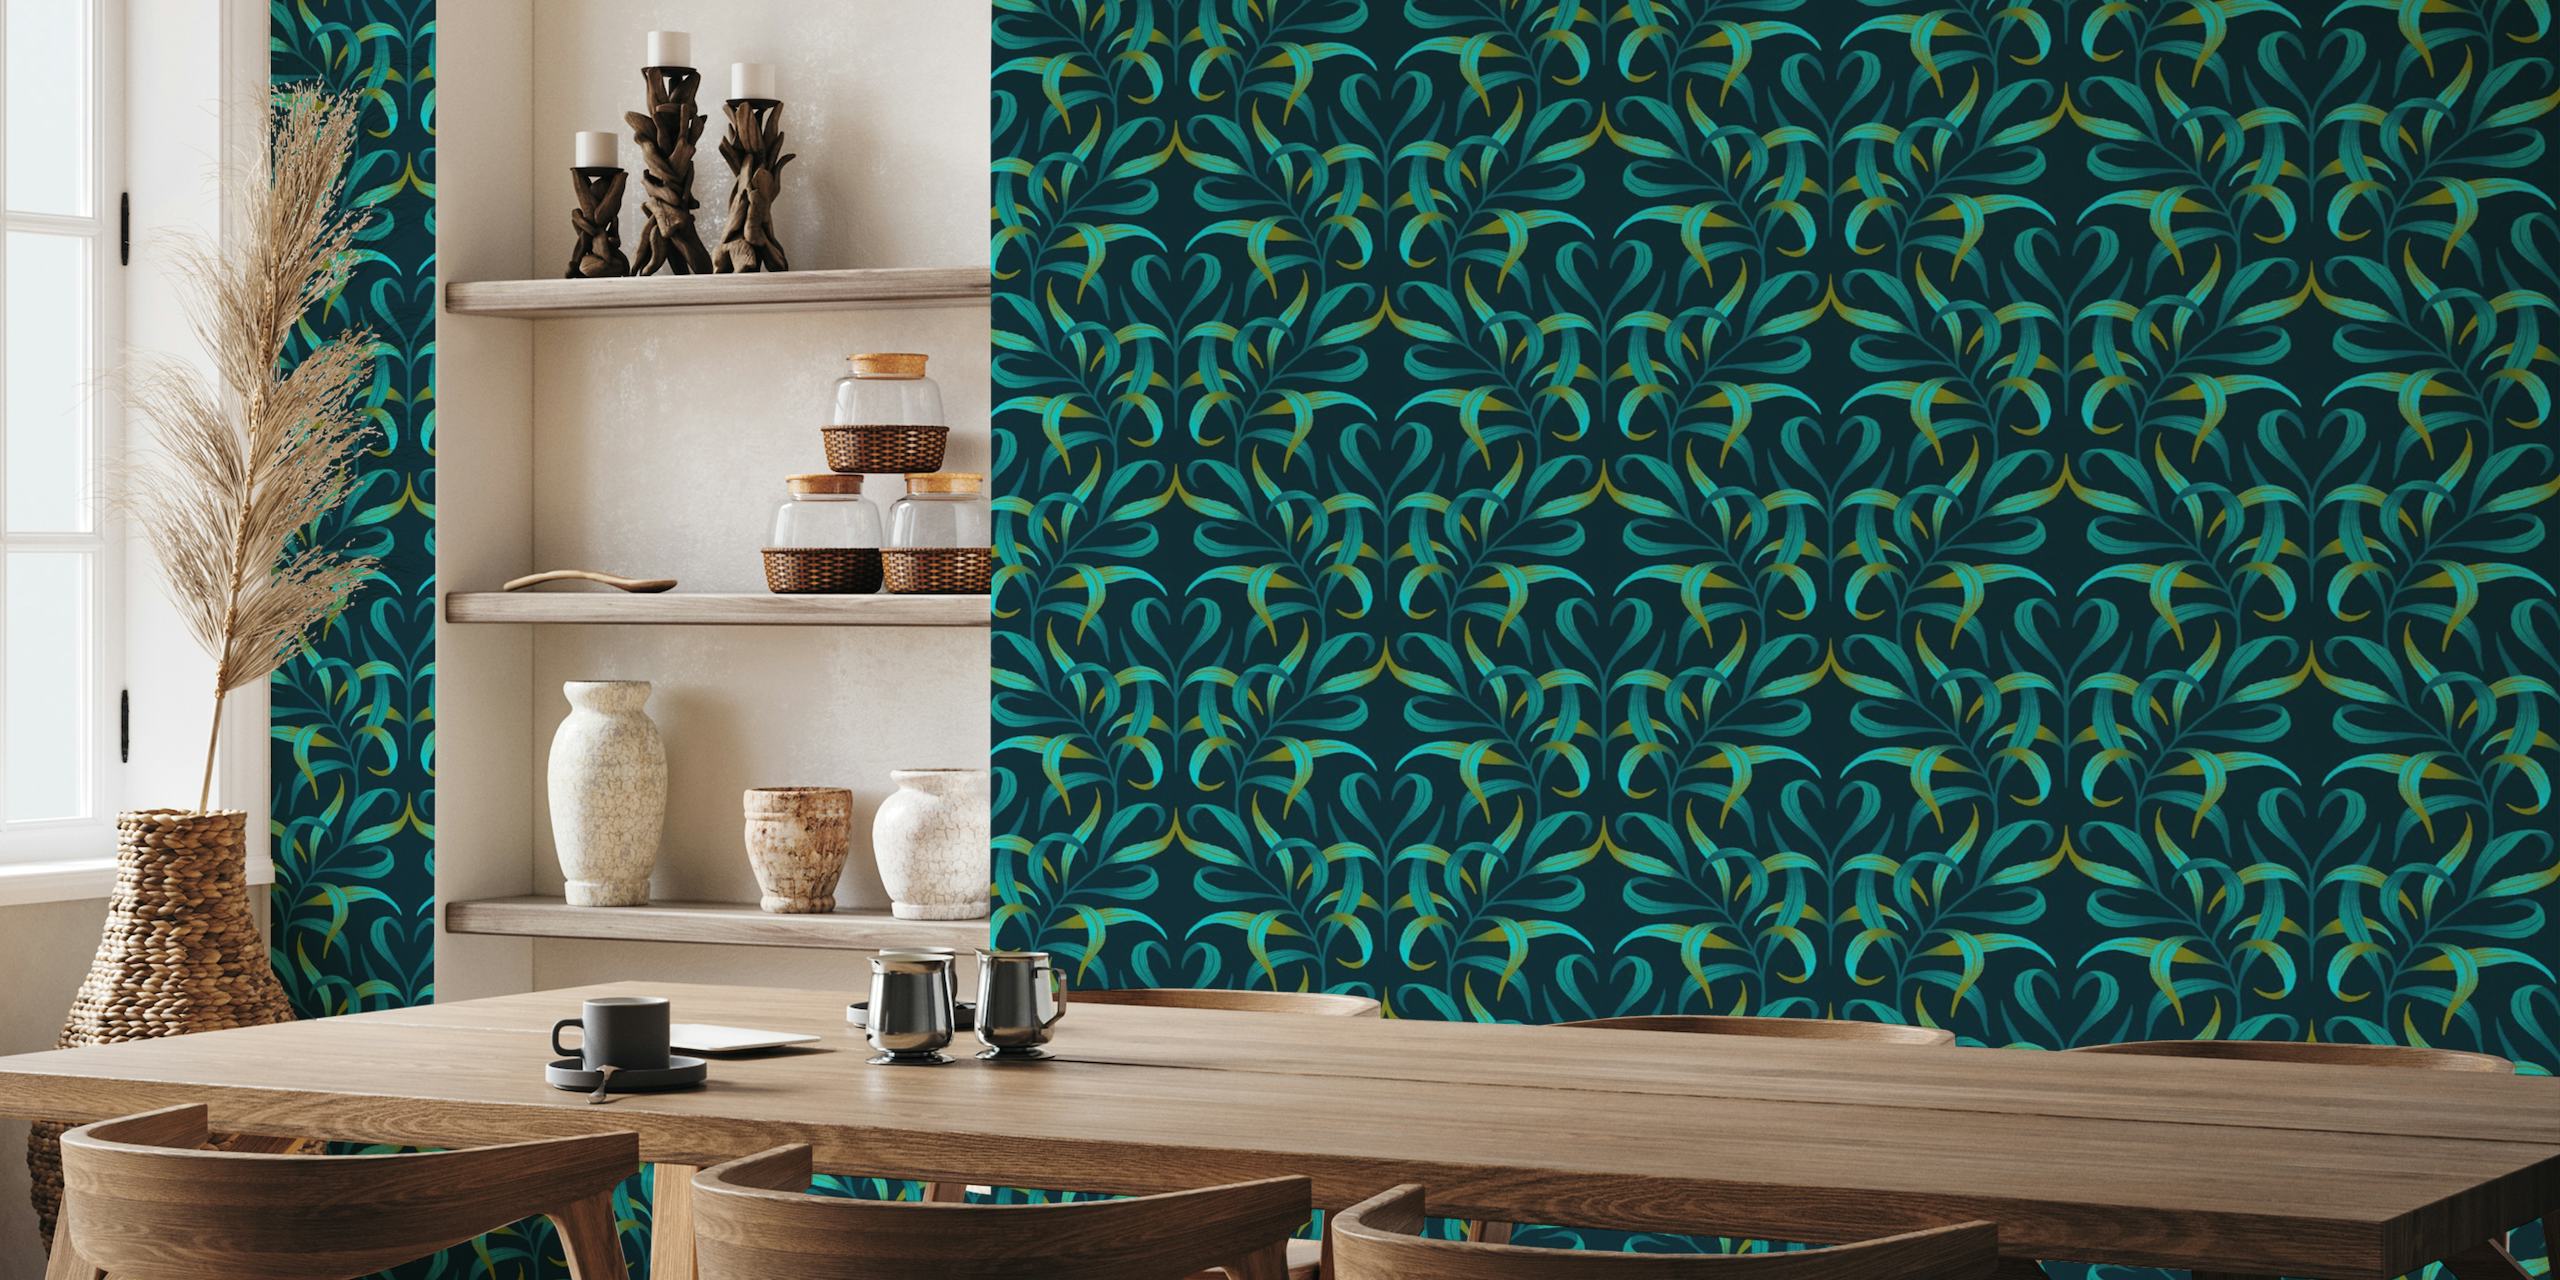 Curled Leaves - Emerald Green / Teal wallpaper